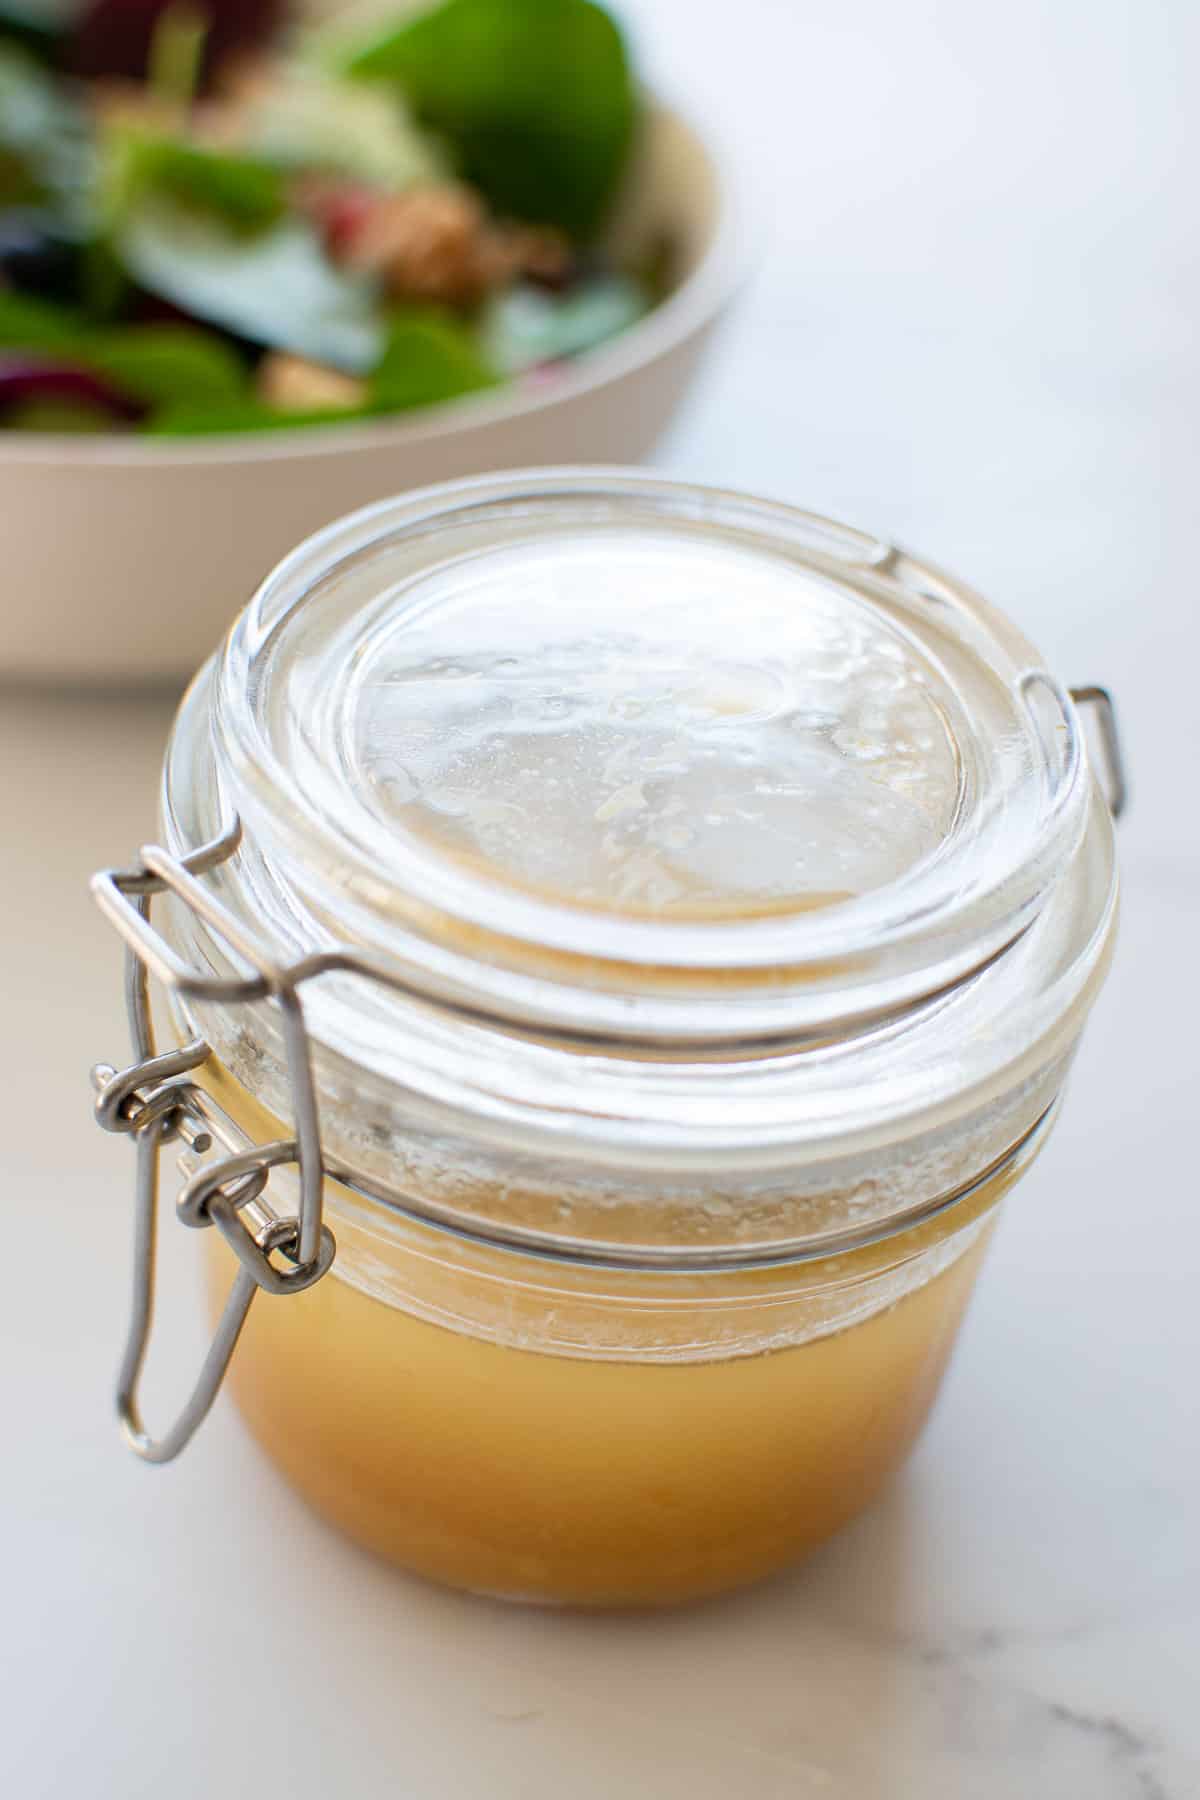 A sealed jar with maple syrup vinaigrette on a table.